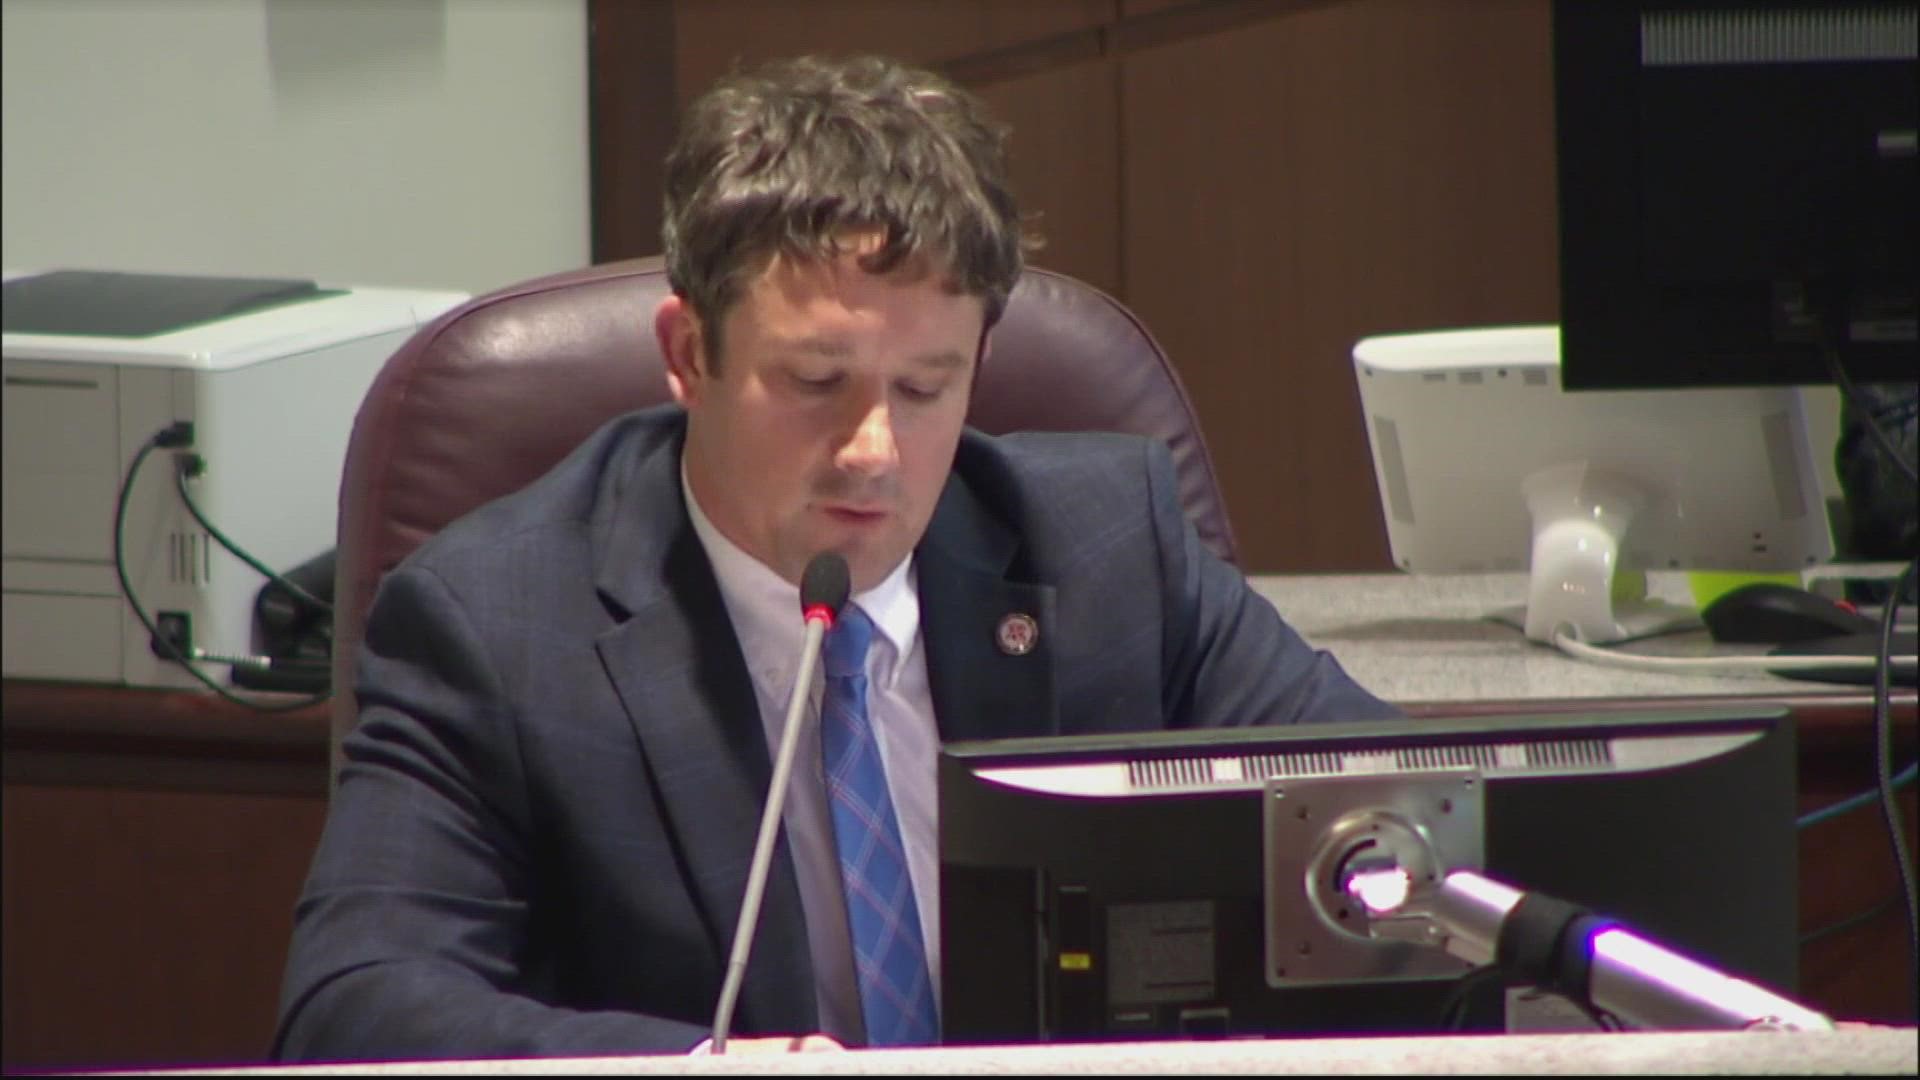 In a 6-1 vote, LCPS Chief of Staff Daniel Smith was appointed interim superintendent in an emergency board meeting, after the unexpected firing of Dr. Scott Ziegler.